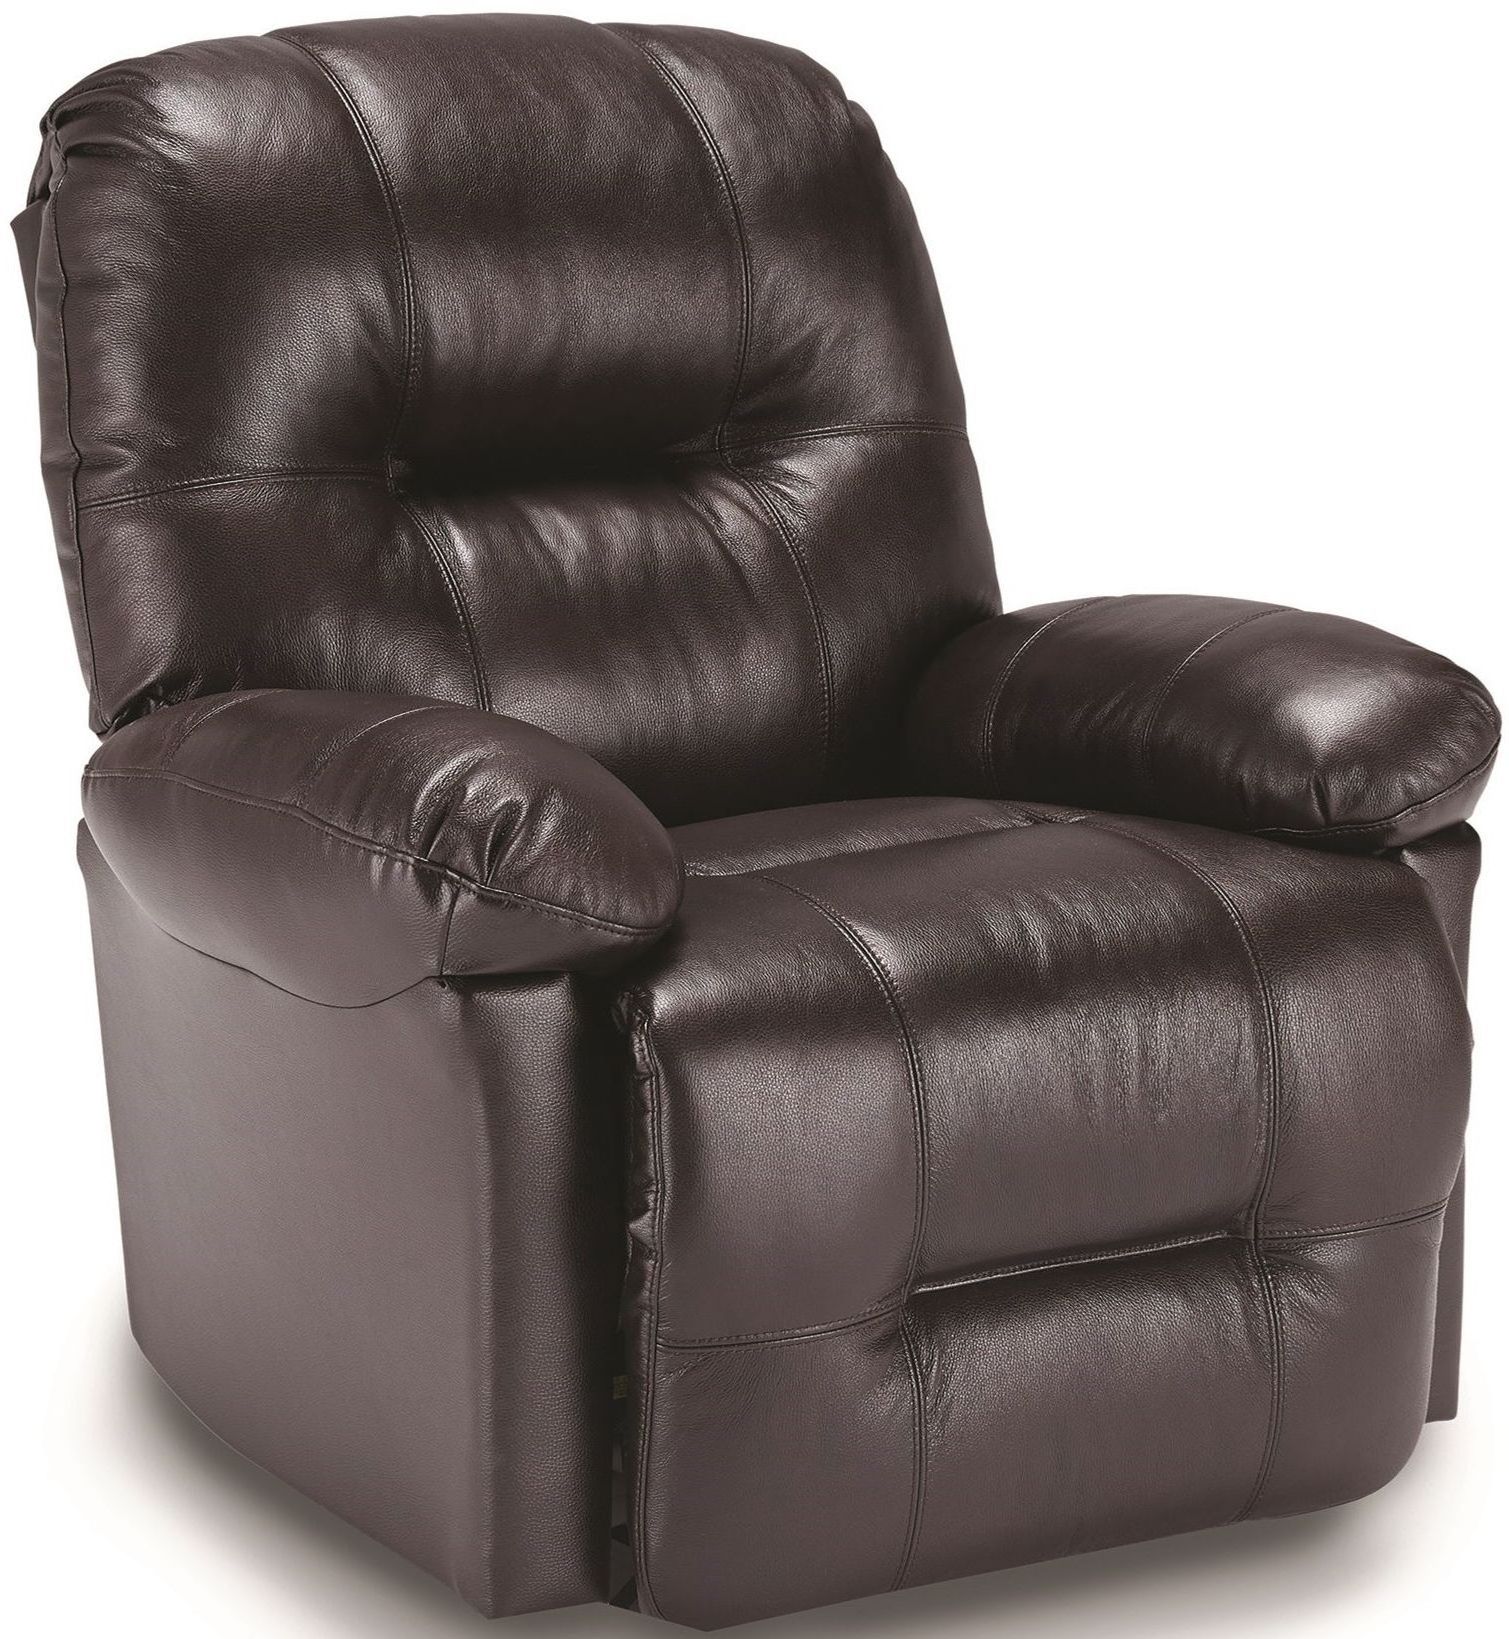 Best® Home Furnishings Zaynah Power Space Saver® Recliner